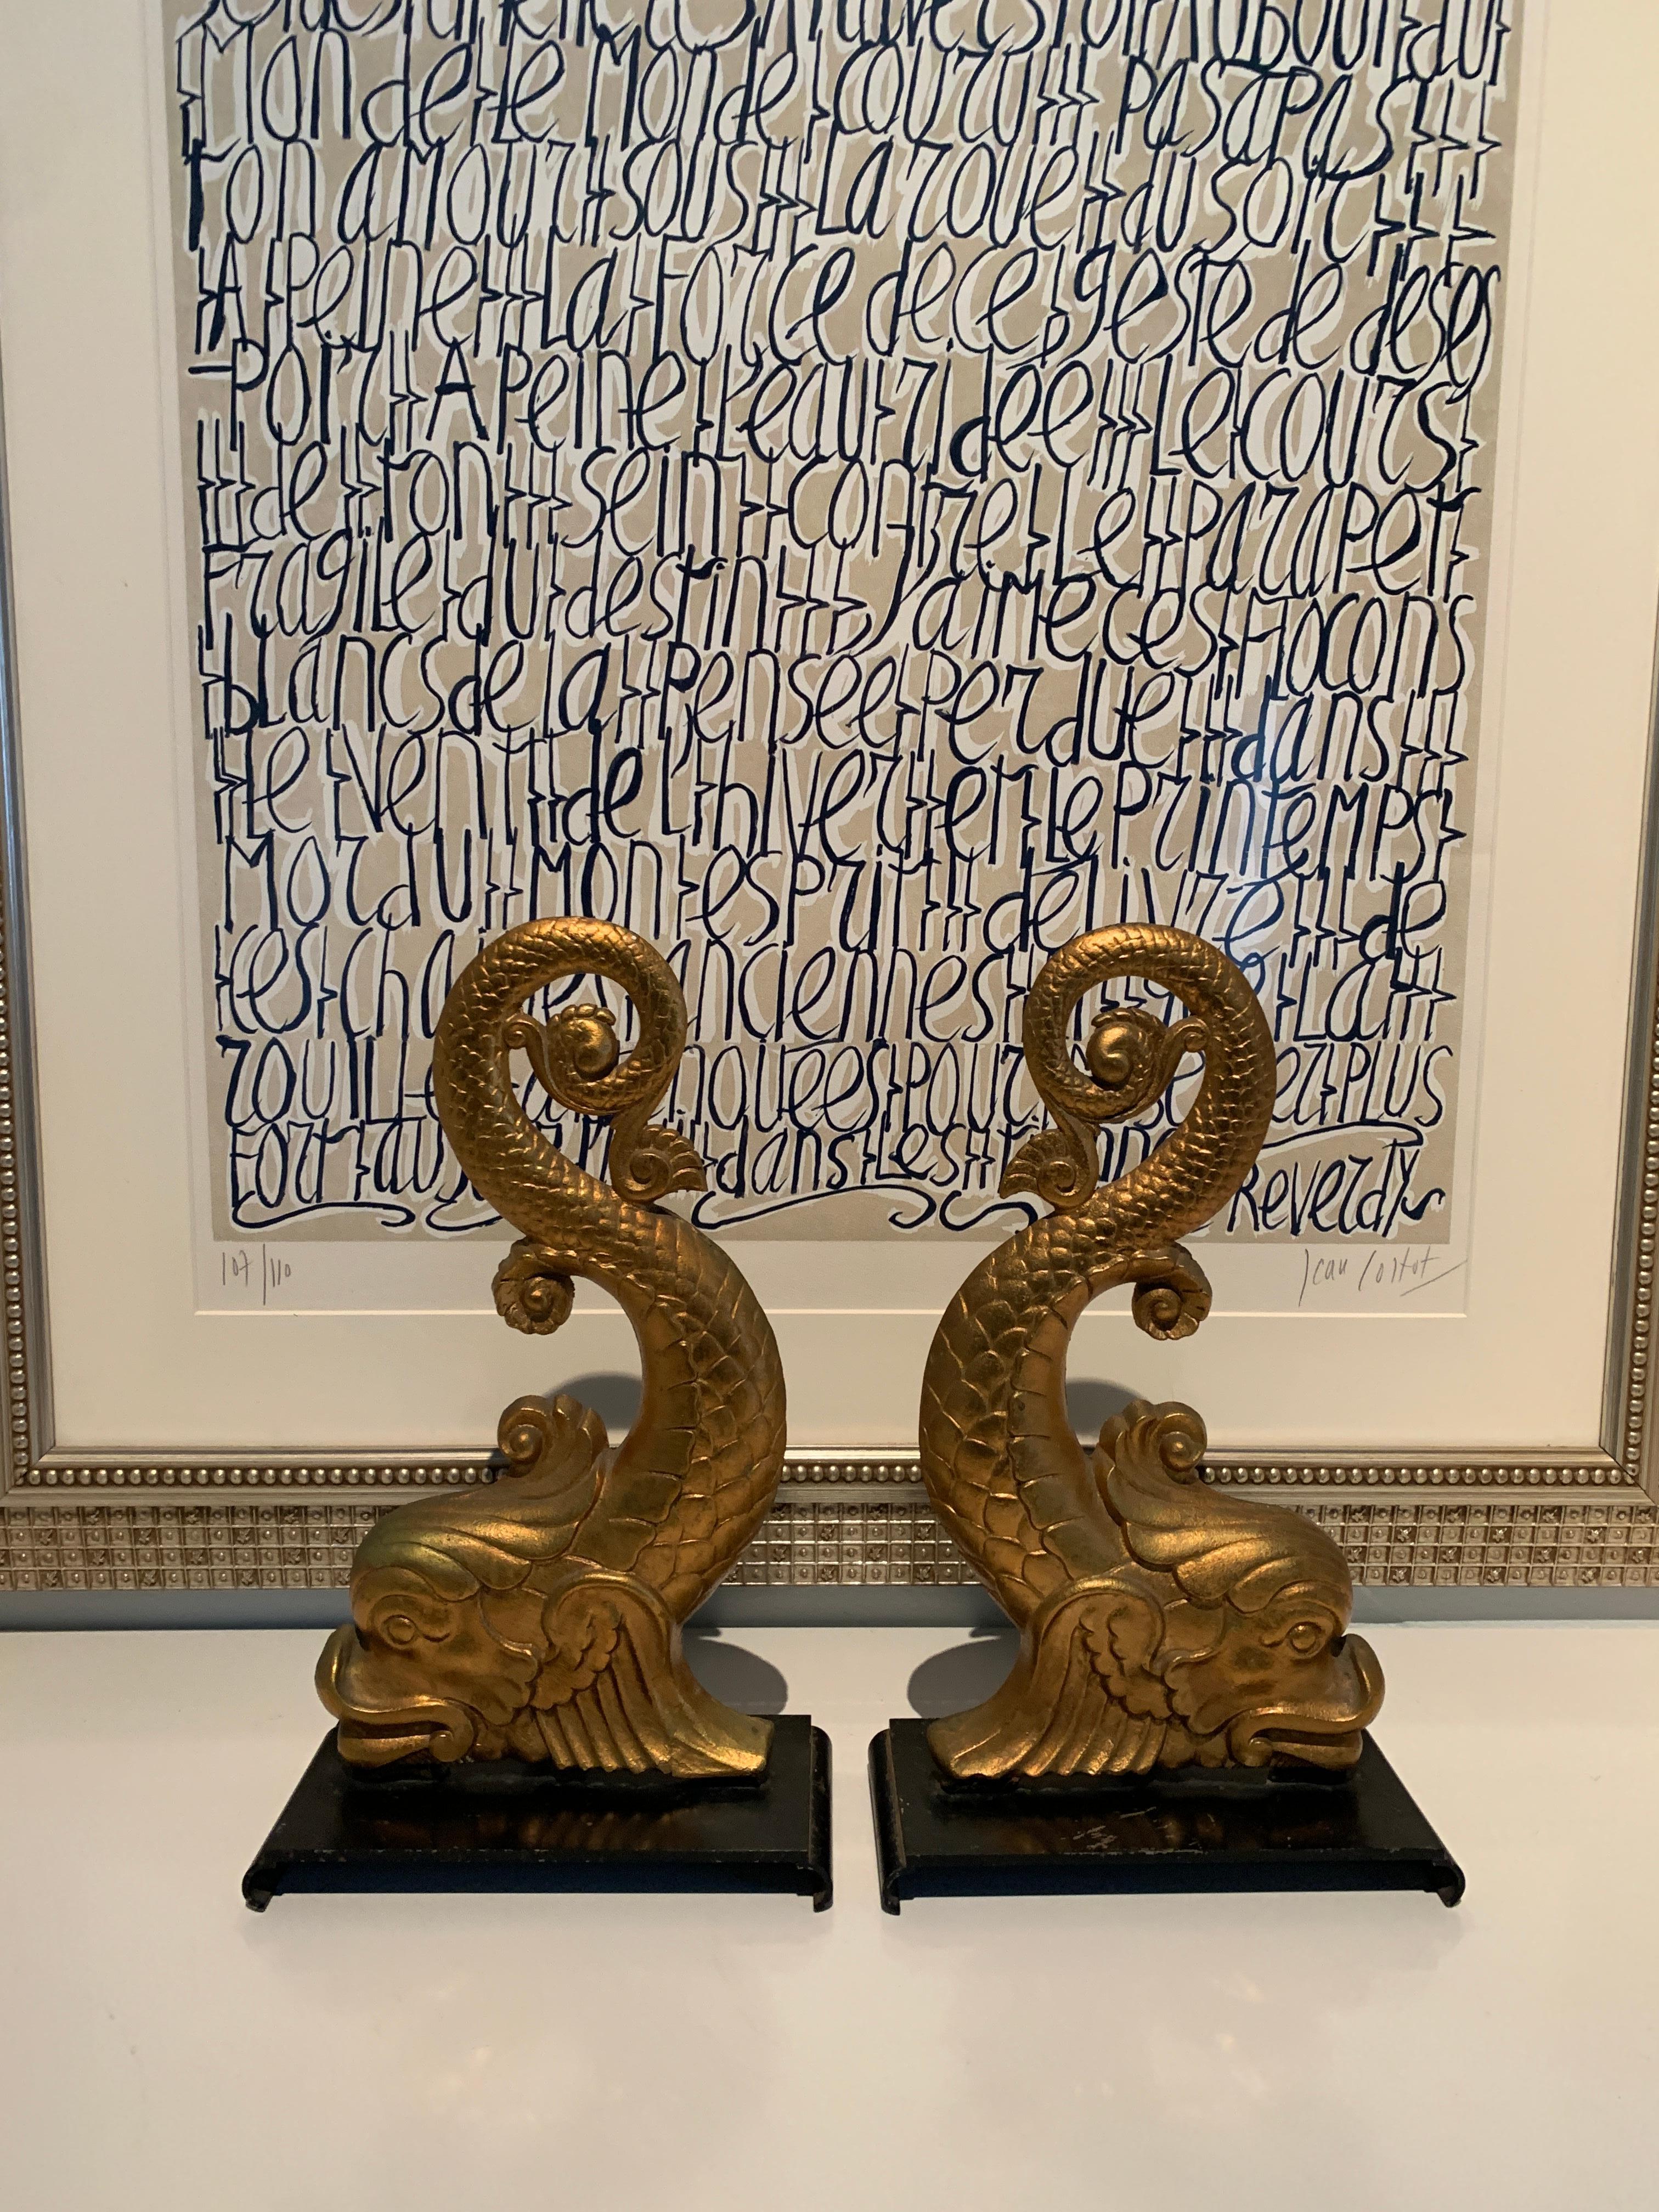 A pair of gilt dolphin andirons or bookends. The pieces are spectacular to look at and are the perfect addition to many fireplaces - while they do not have the rods to hold the logs they are a wonderful pair. They would also make exceptional